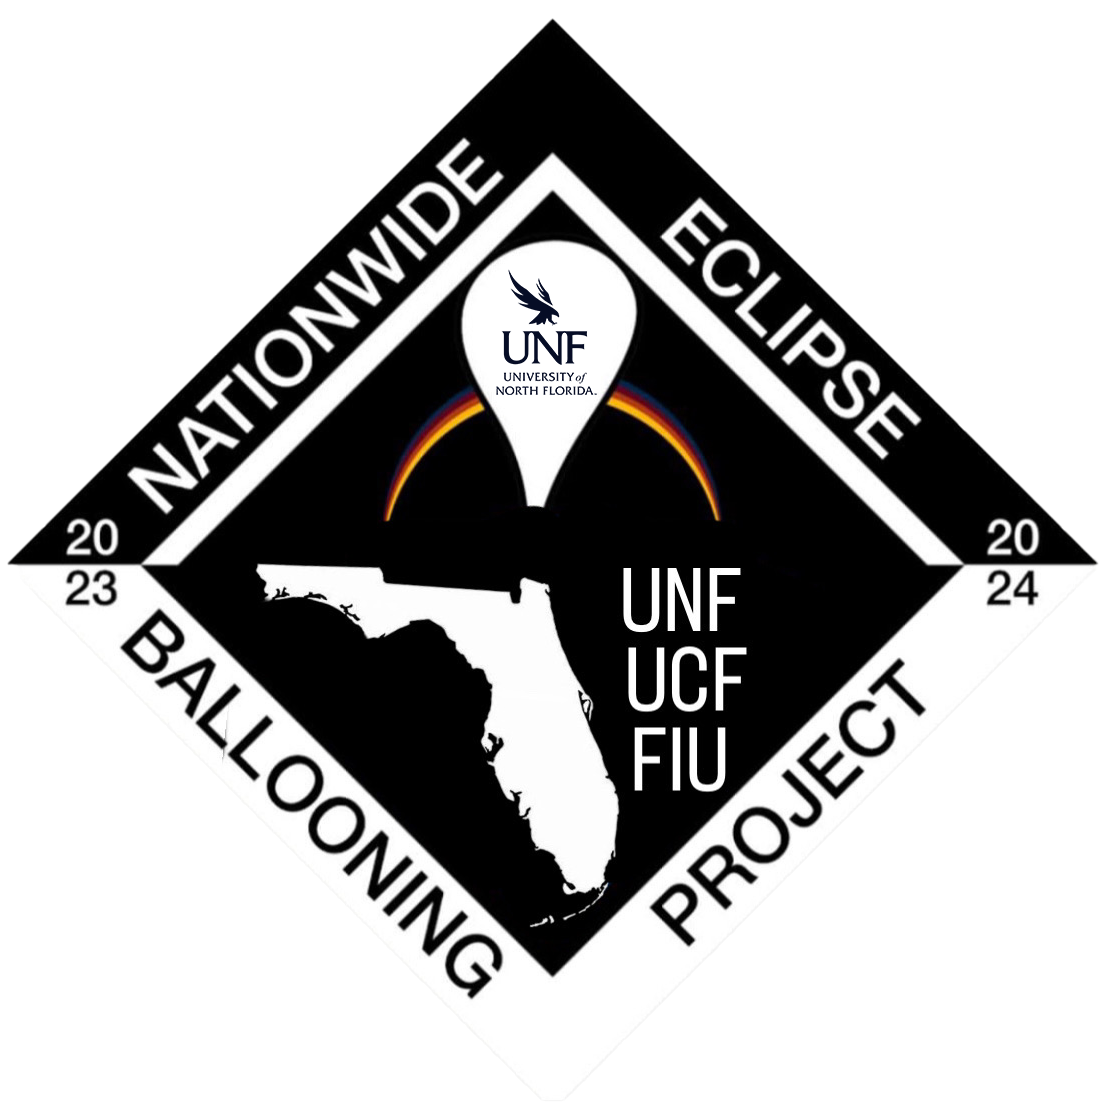 Diamond shape with the shape of Florida in the center and the acronyms UNF UCF FIU